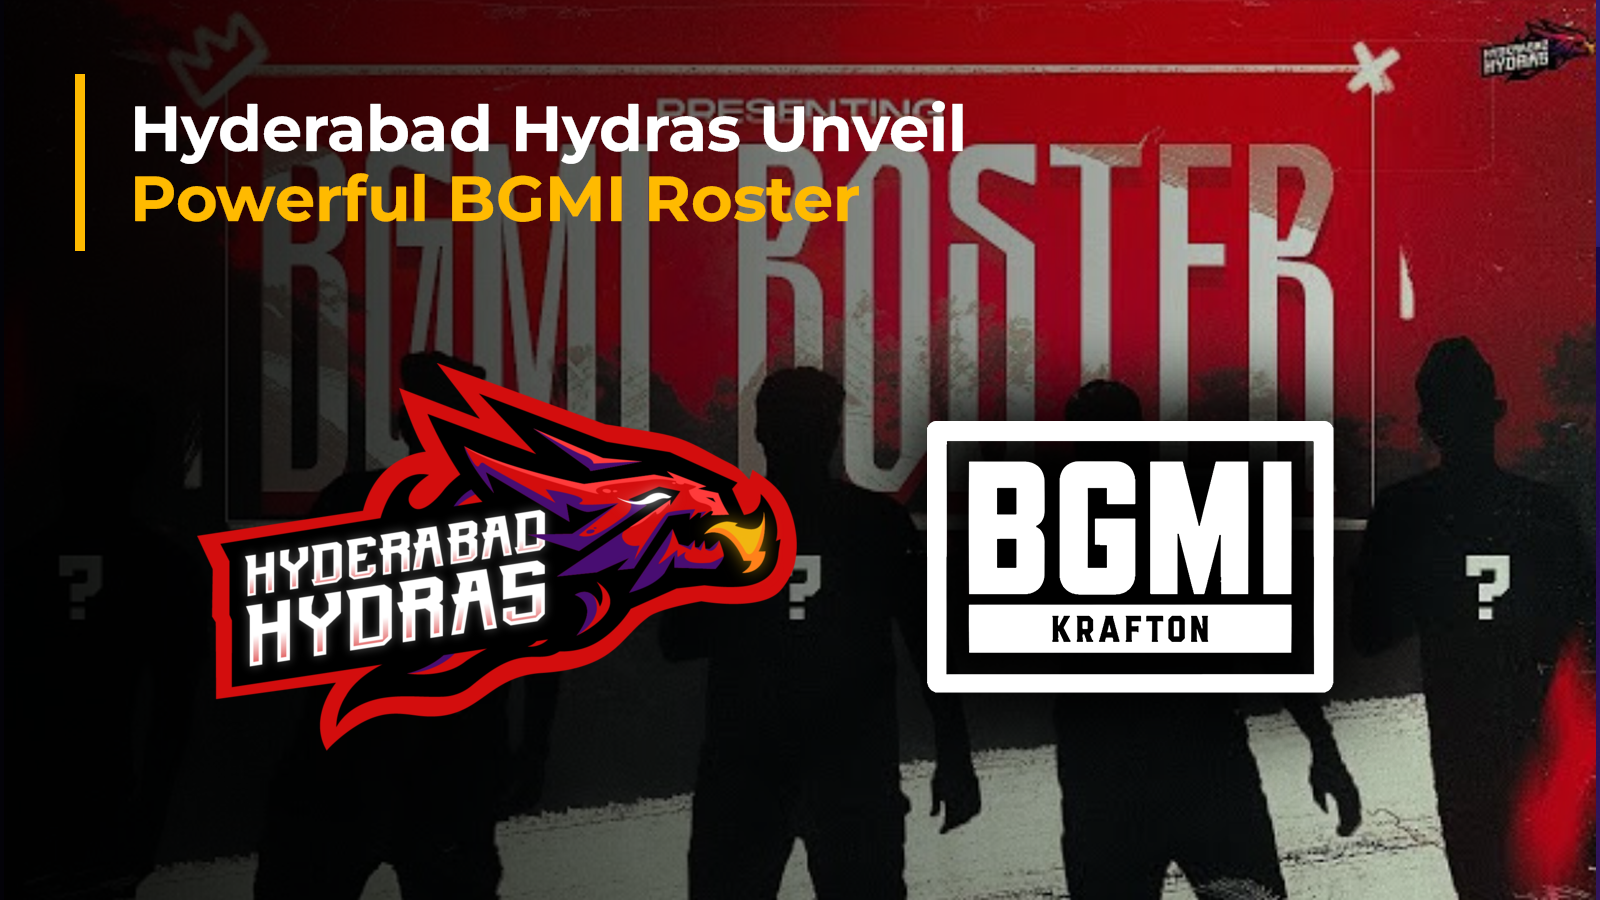 Hyderabad Hydras Unveil Powerful BGMI Roster Featuring Ultron and JokerOG